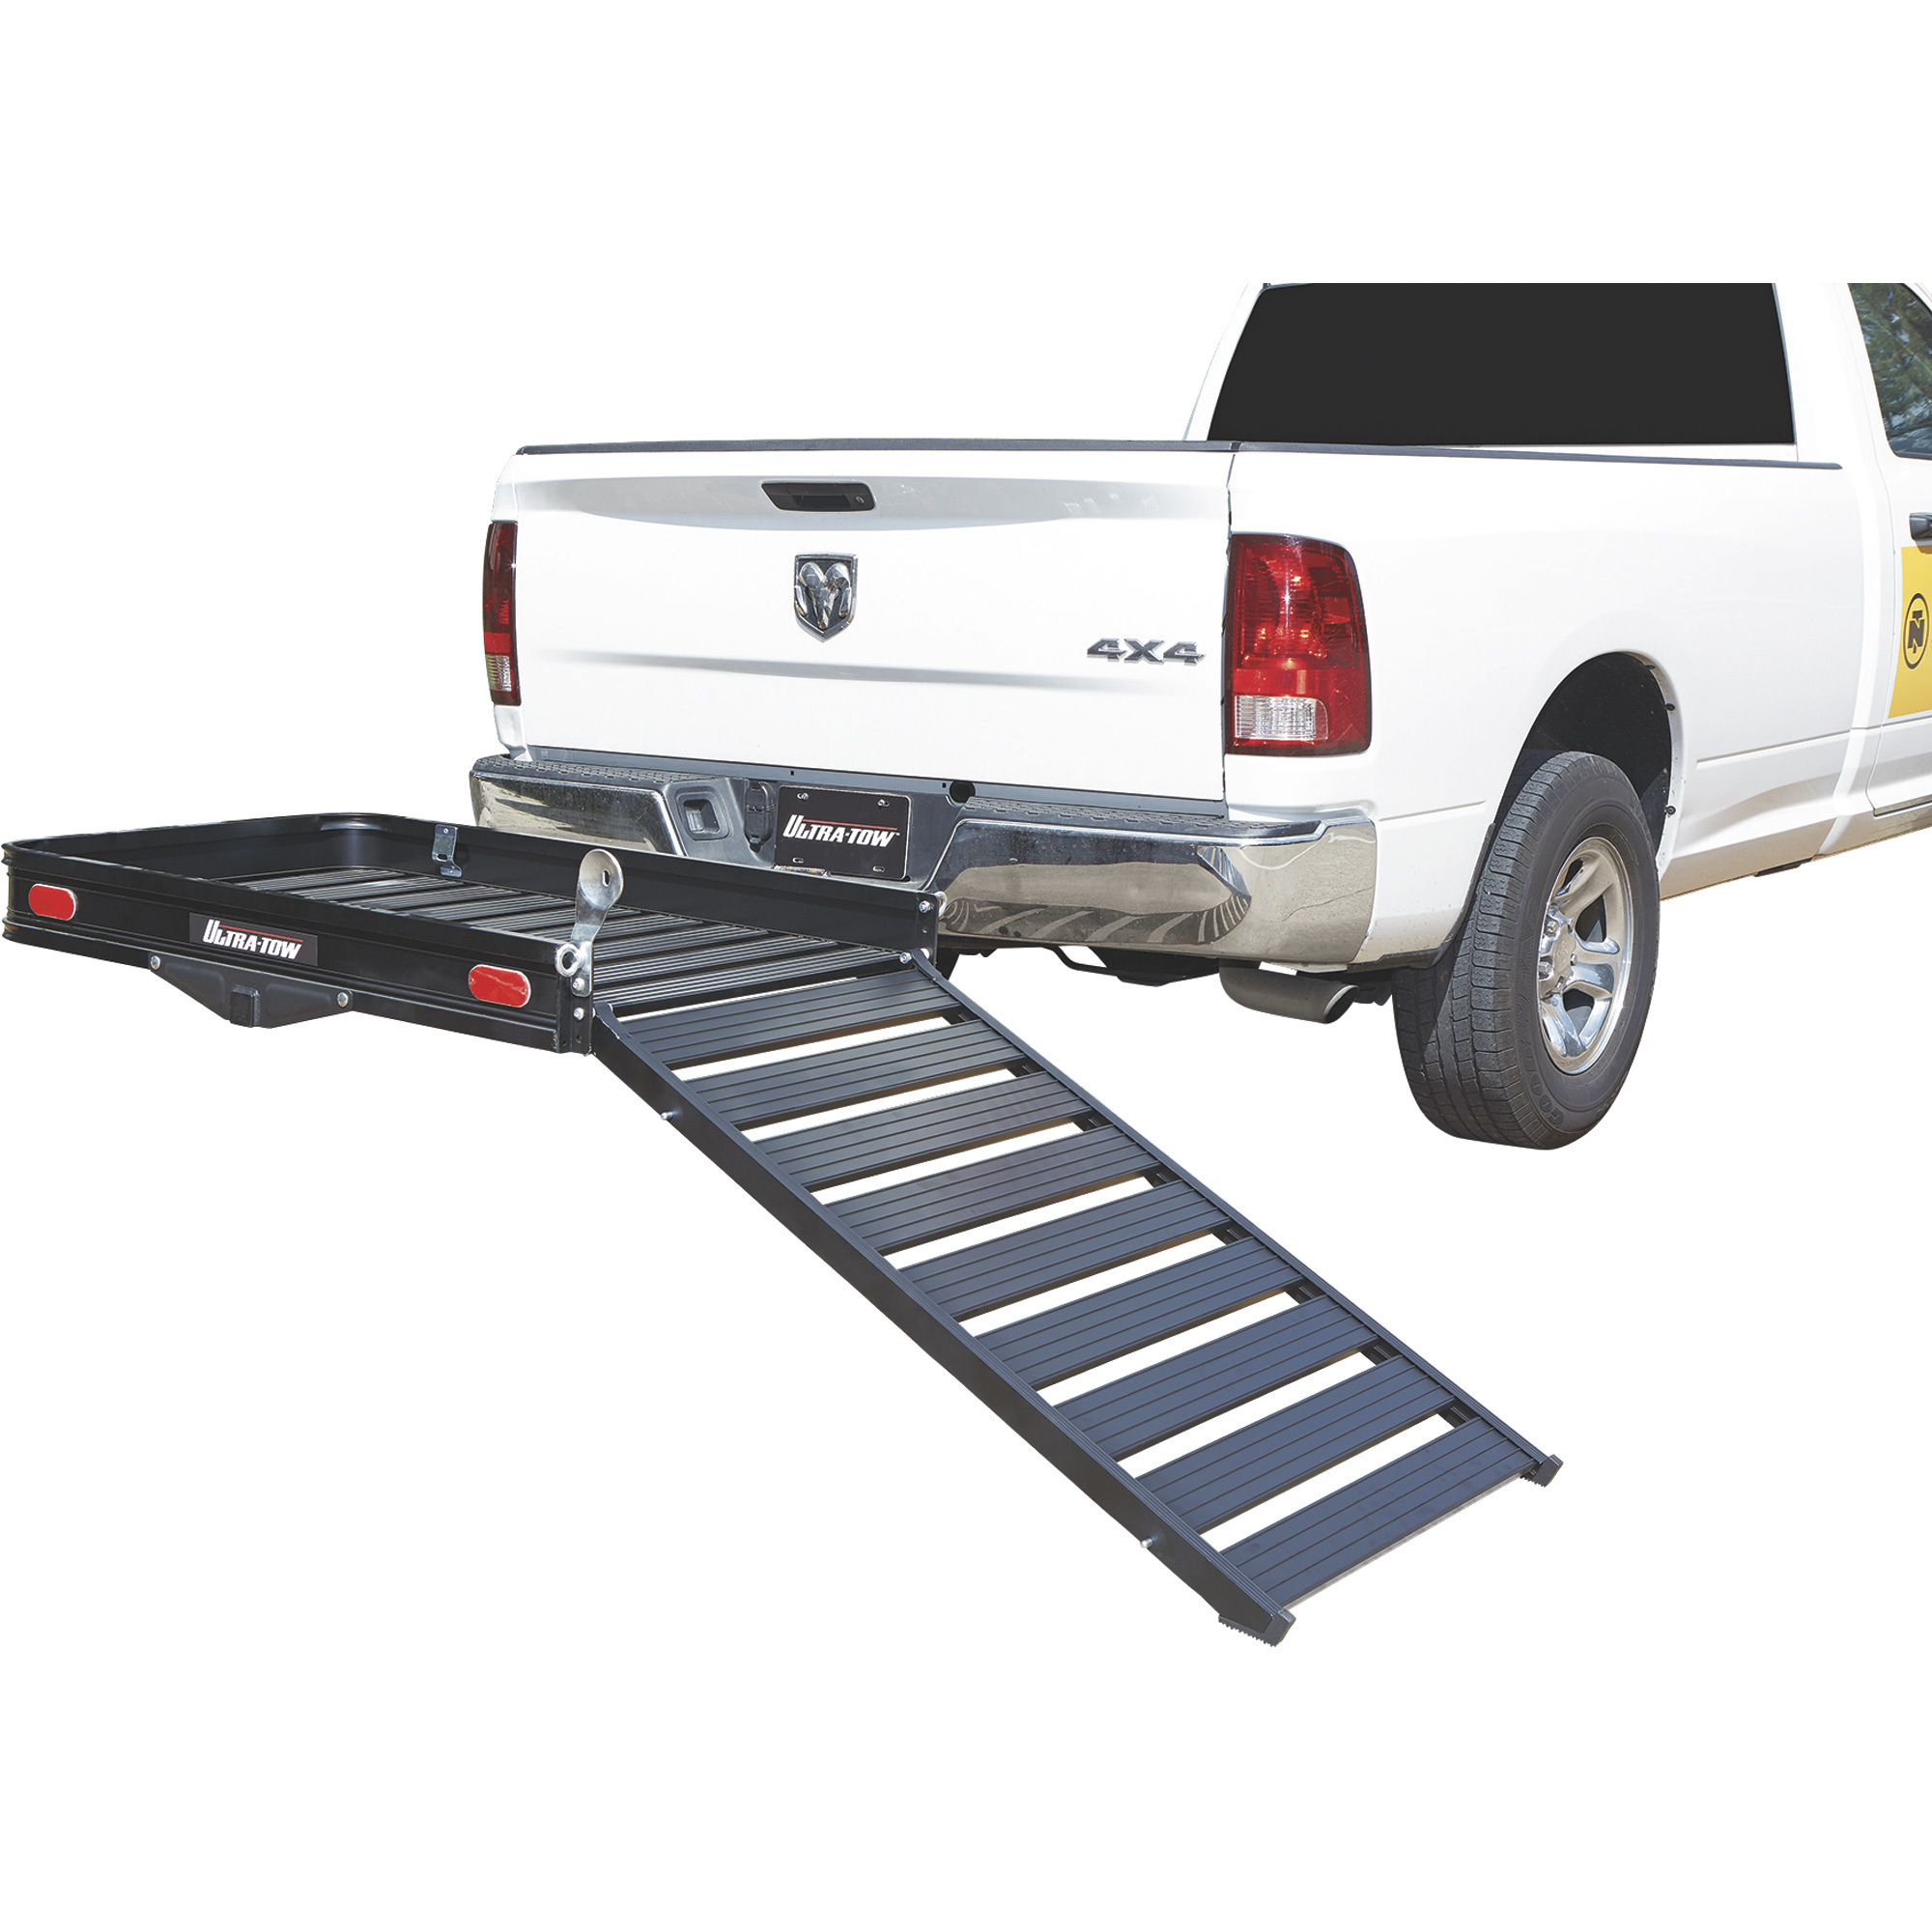 Ultra-Tow Aluminum Hitch Cargo Carrier with Ramp — 500-Lb. Capacity, Black, 60Inch x 30Inch x 4Inch -  10101174